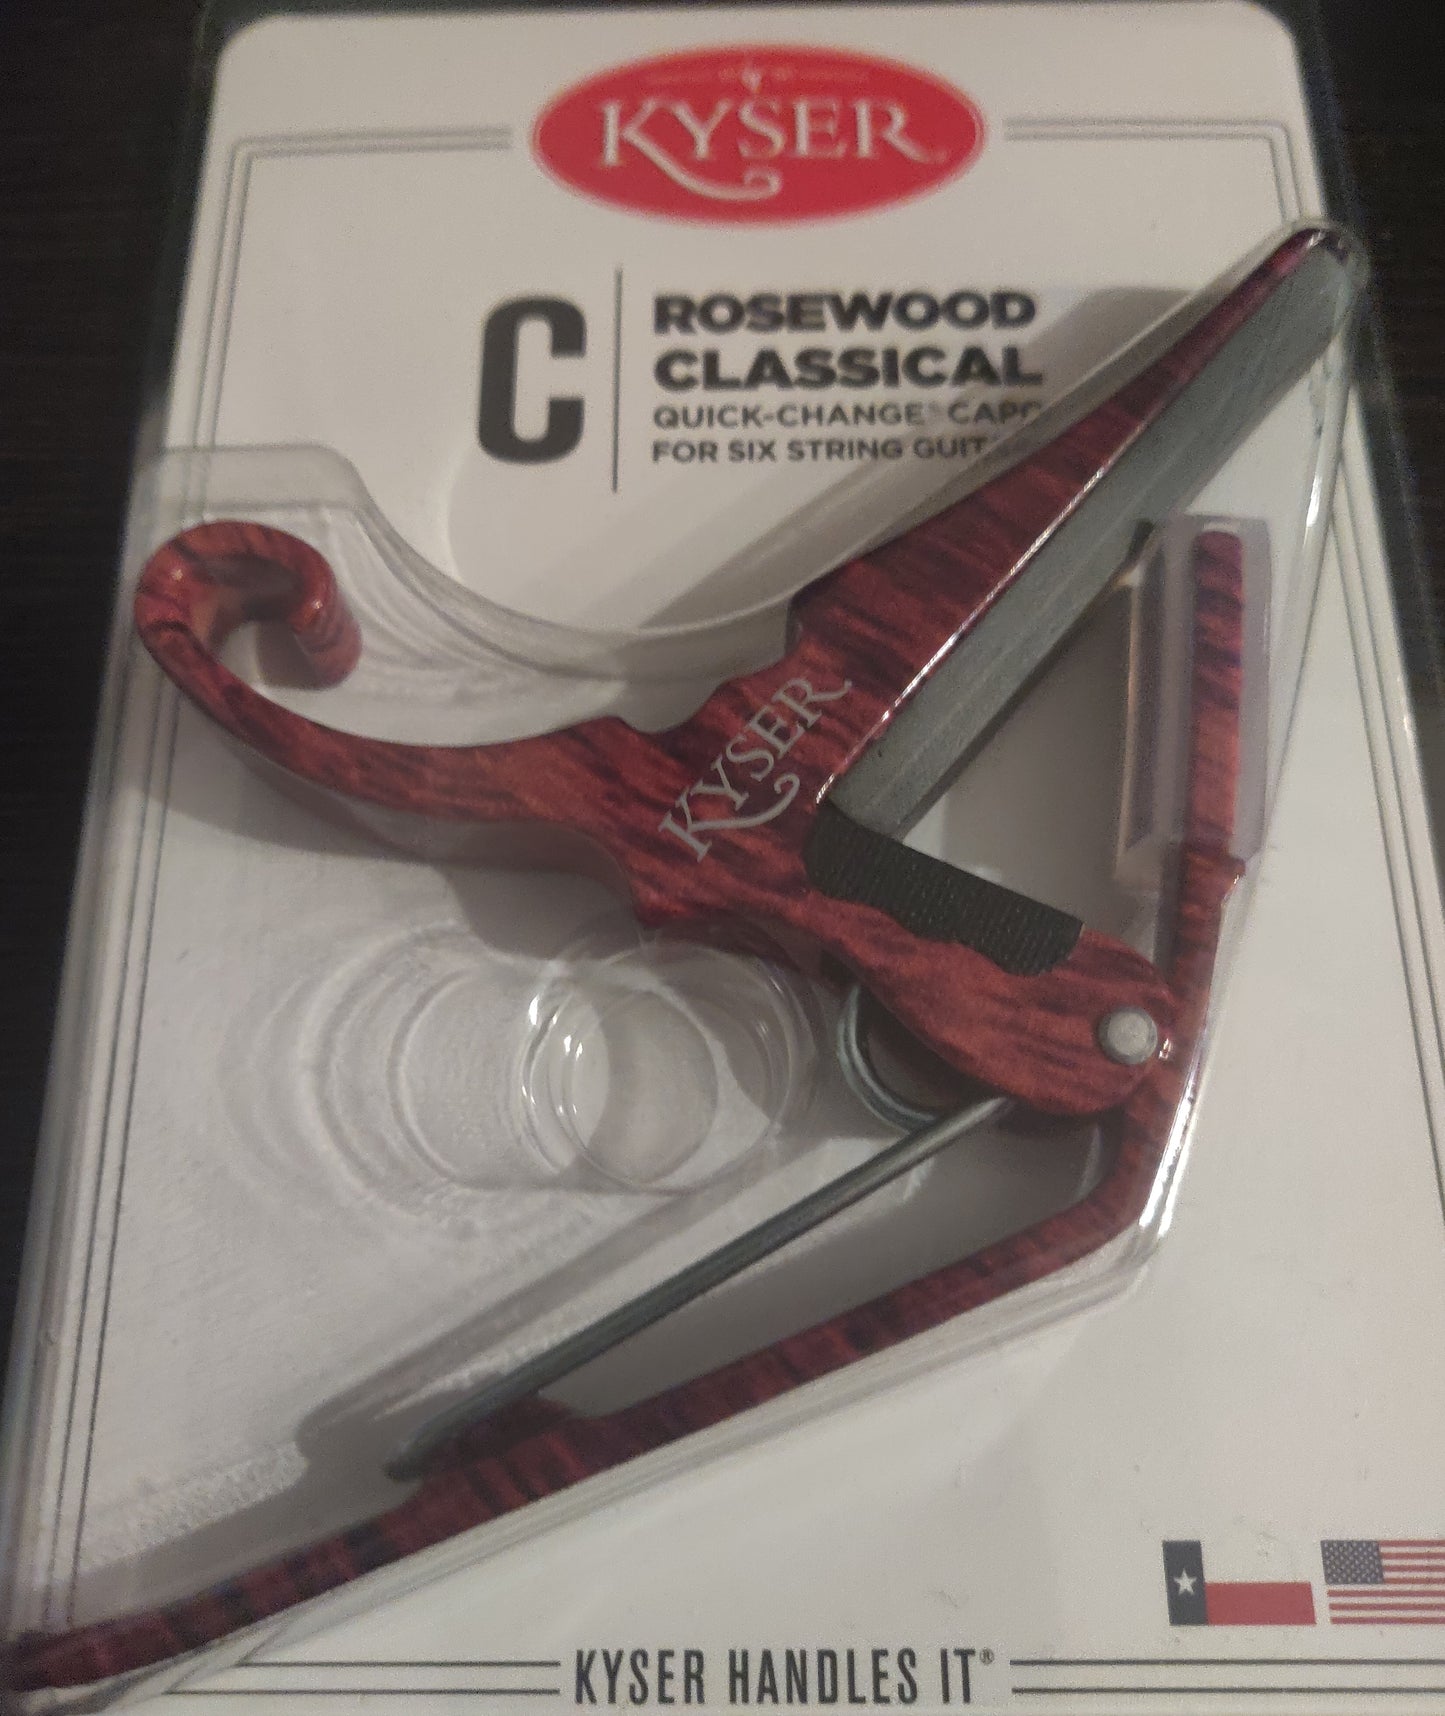 Kyser® Quick-Change Capo for CLASSICAL Guitars - Rosewood